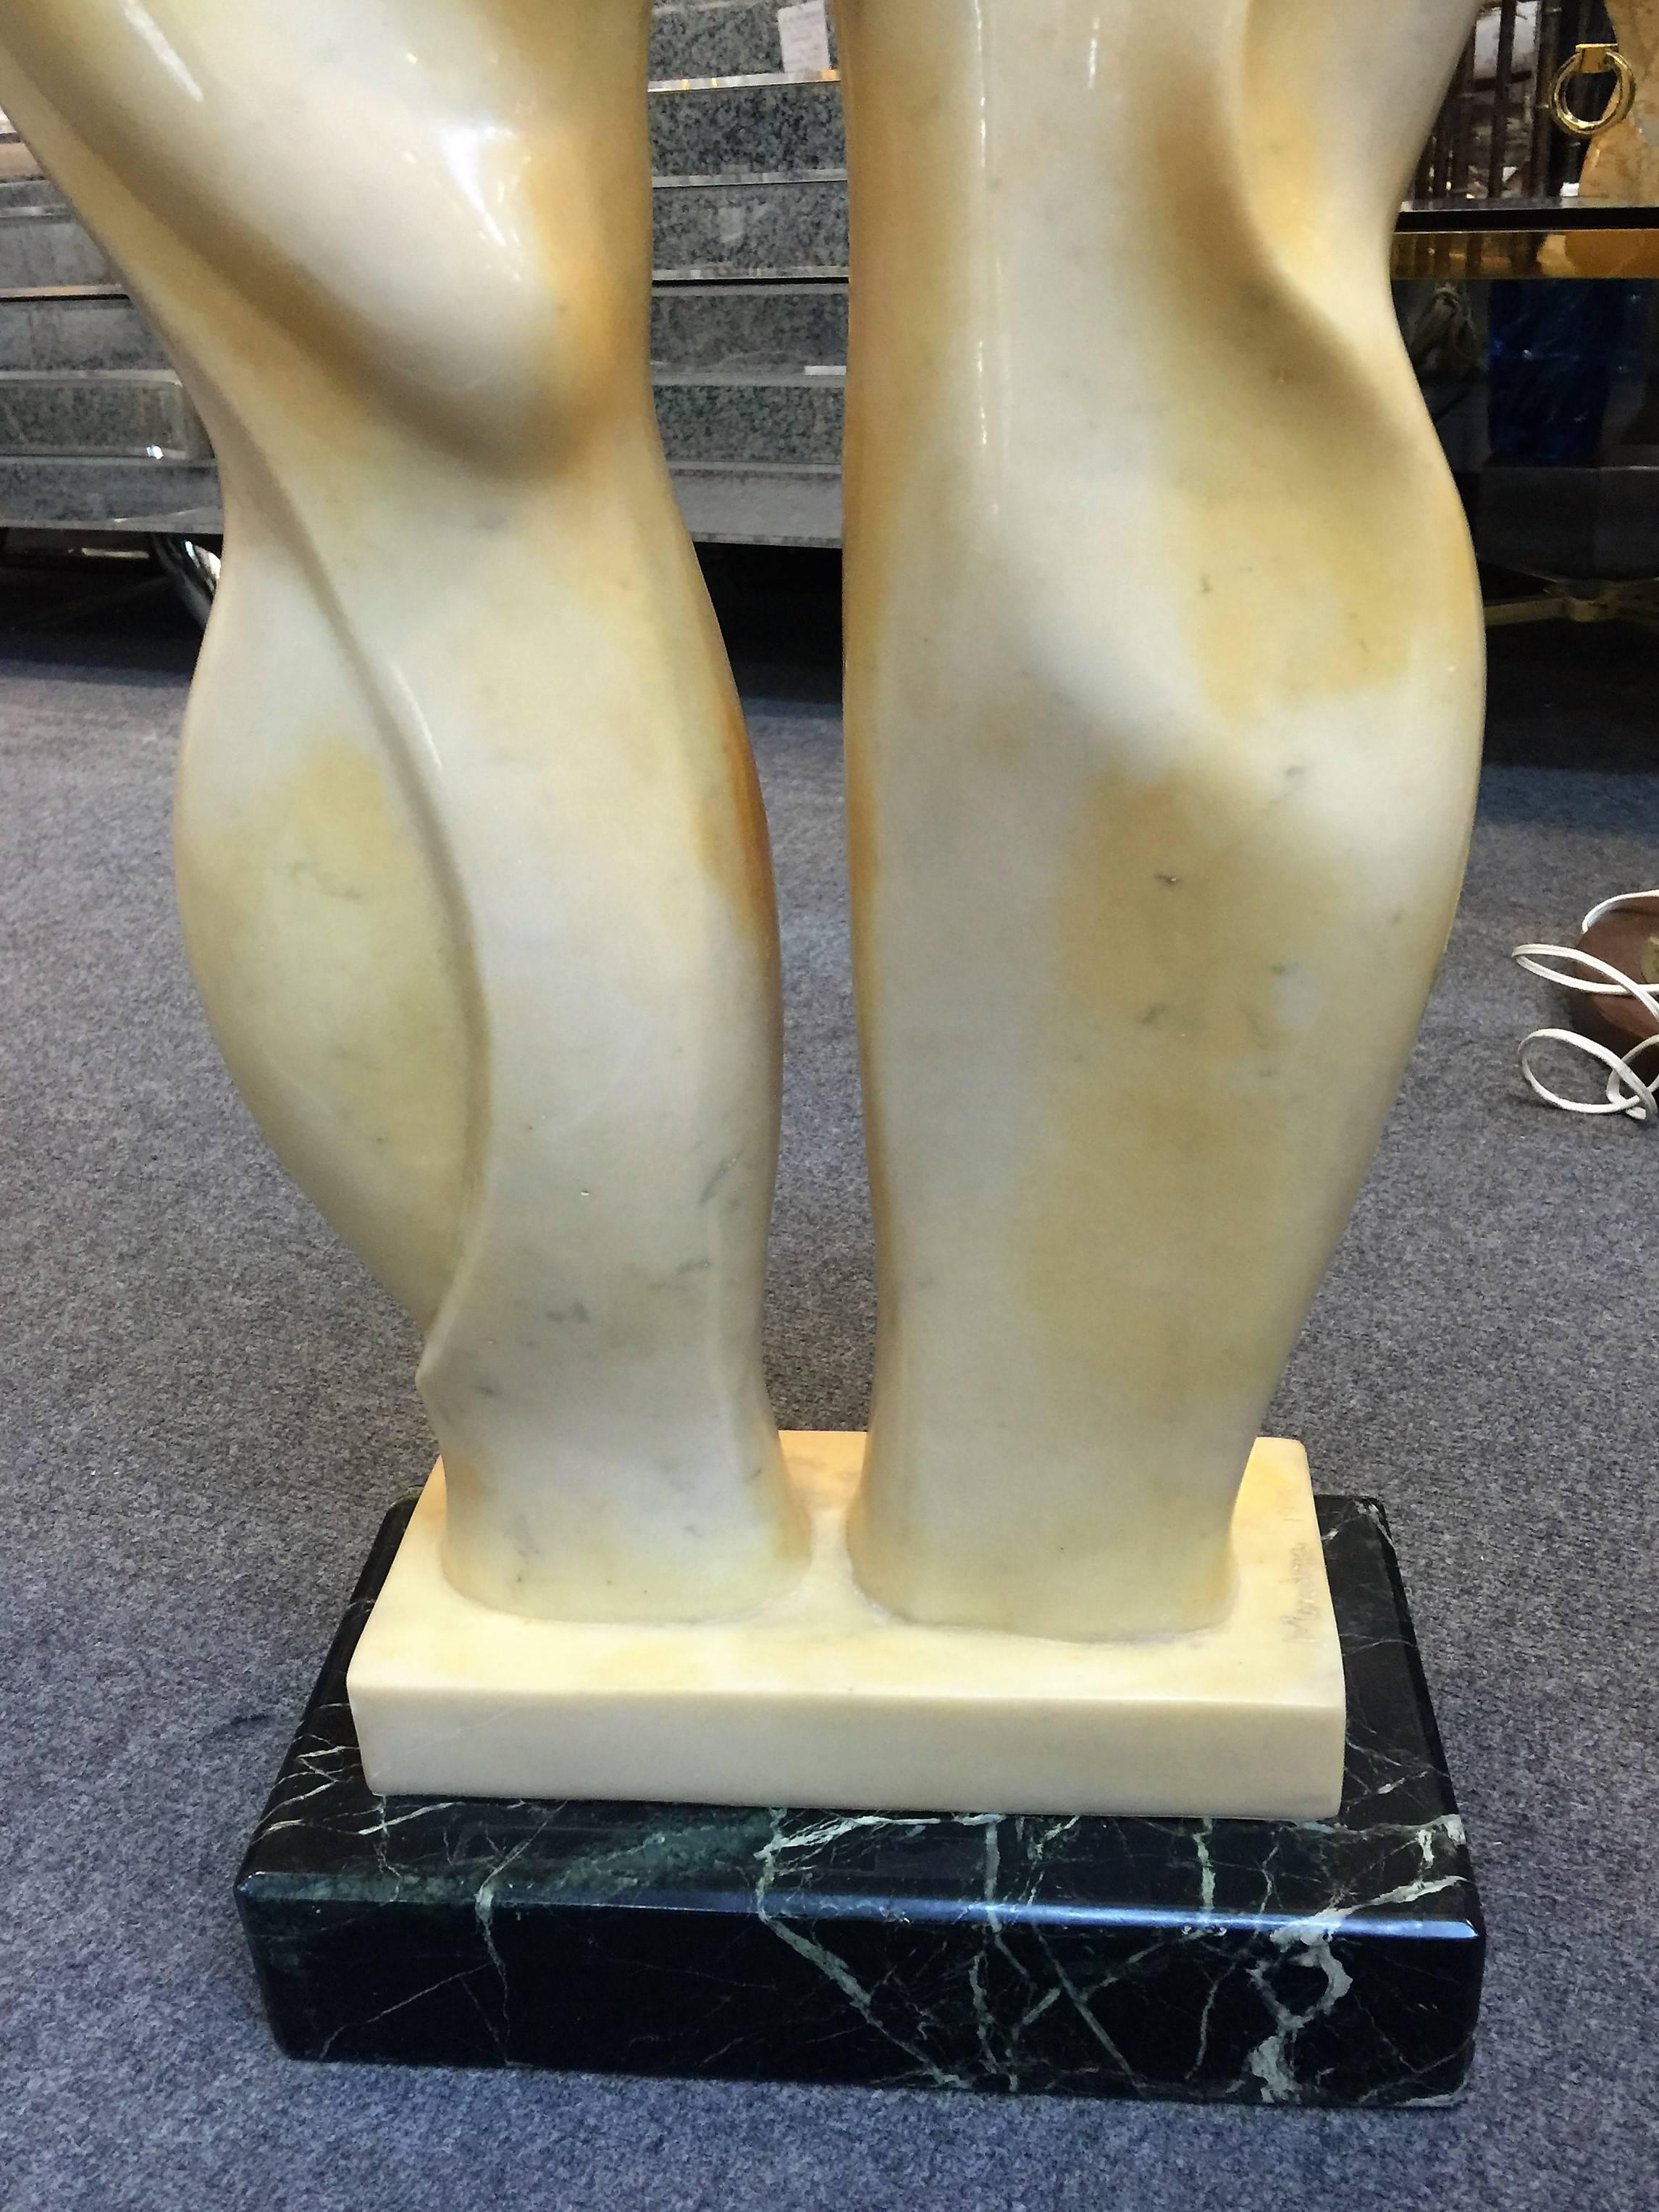 Large Modernist Marble Sculpture Signed Mendoza, 1976 In Excellent Condition For Sale In Mount Penn, PA